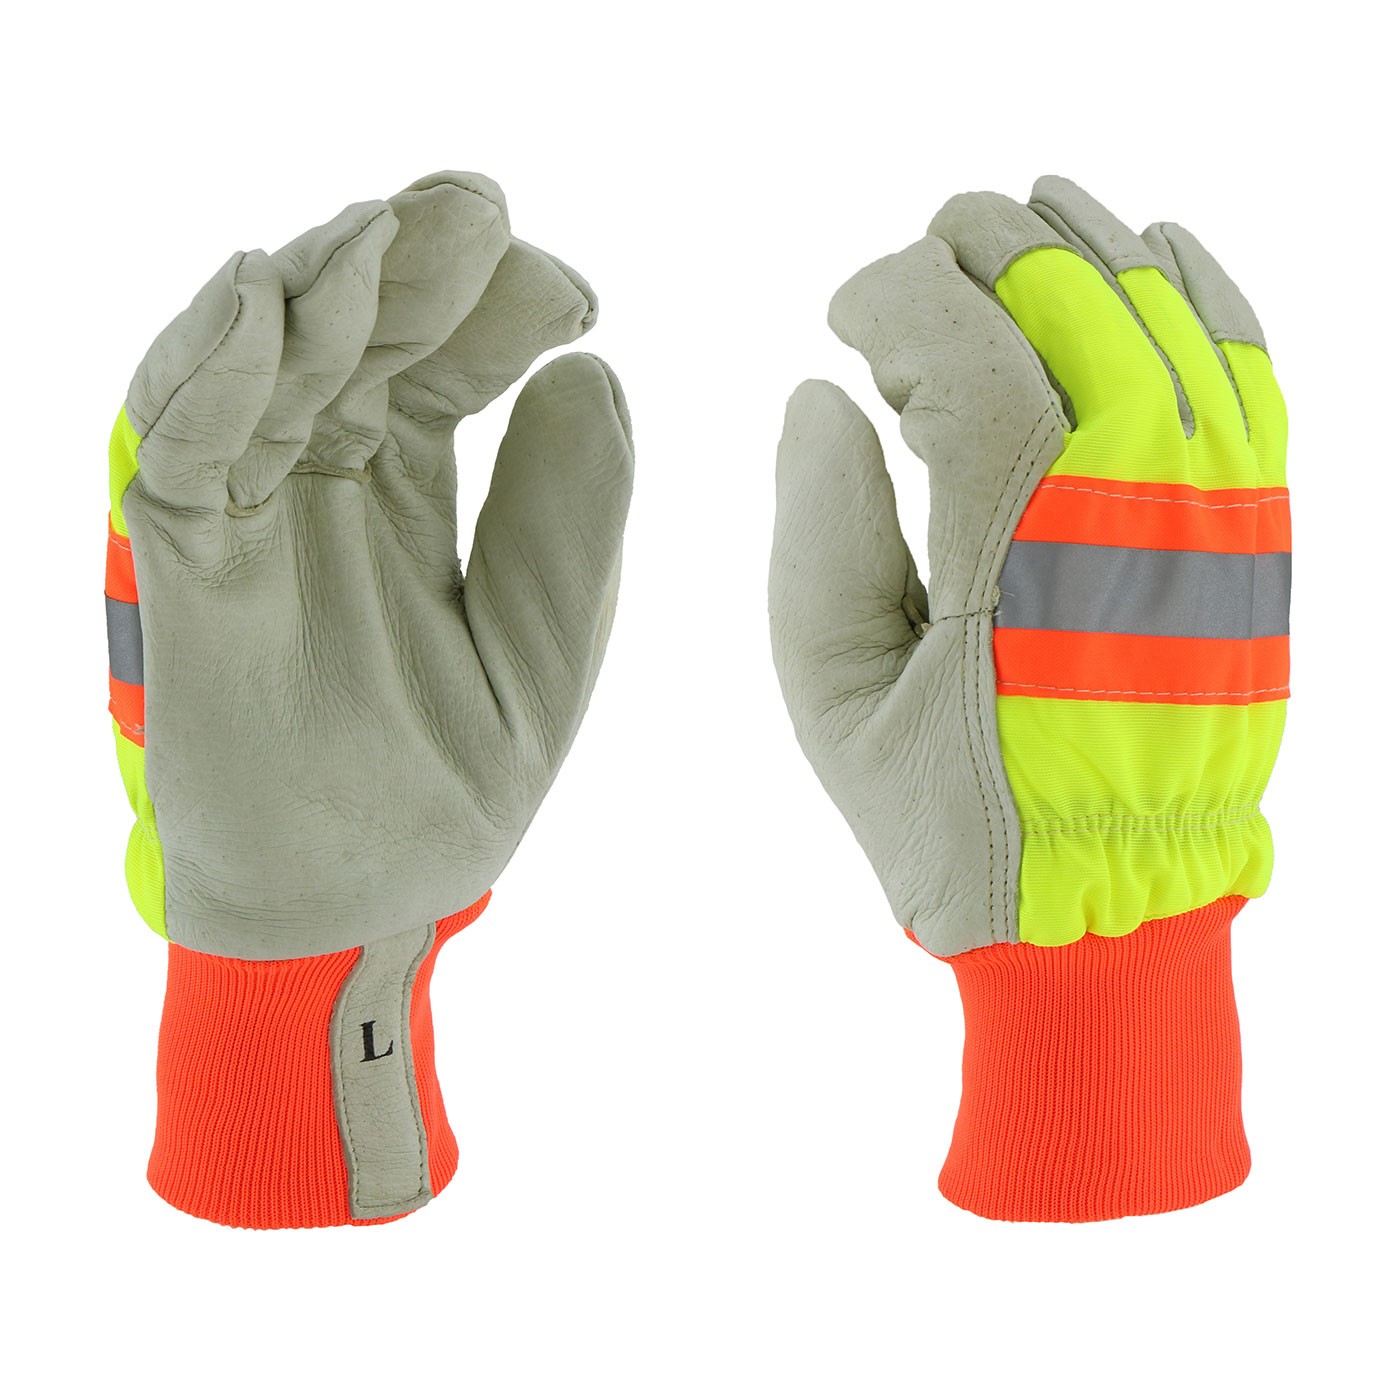 PIP Top Grain Pigskin Leather Palm Glove with Hi-Vis Nylon Back and 3M Thinsulate Liner - Knit Wrist  (#HVY1555)